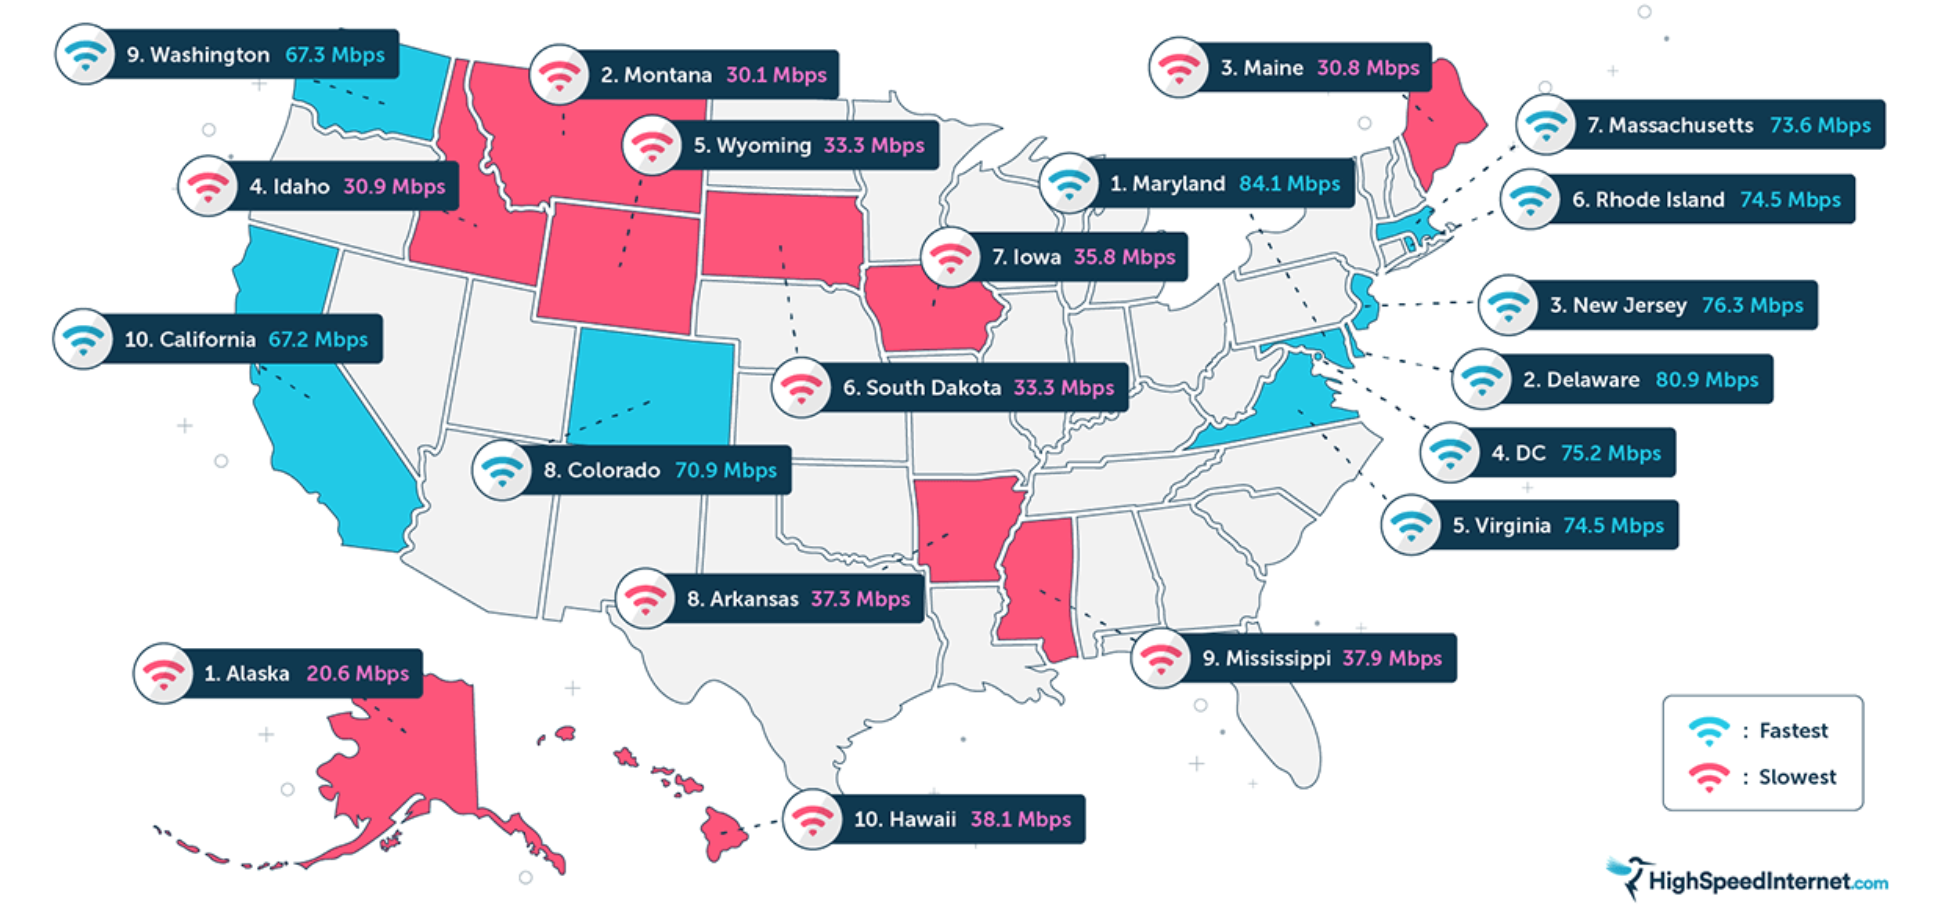 Cities and States with the Fastest and Slowest Internet